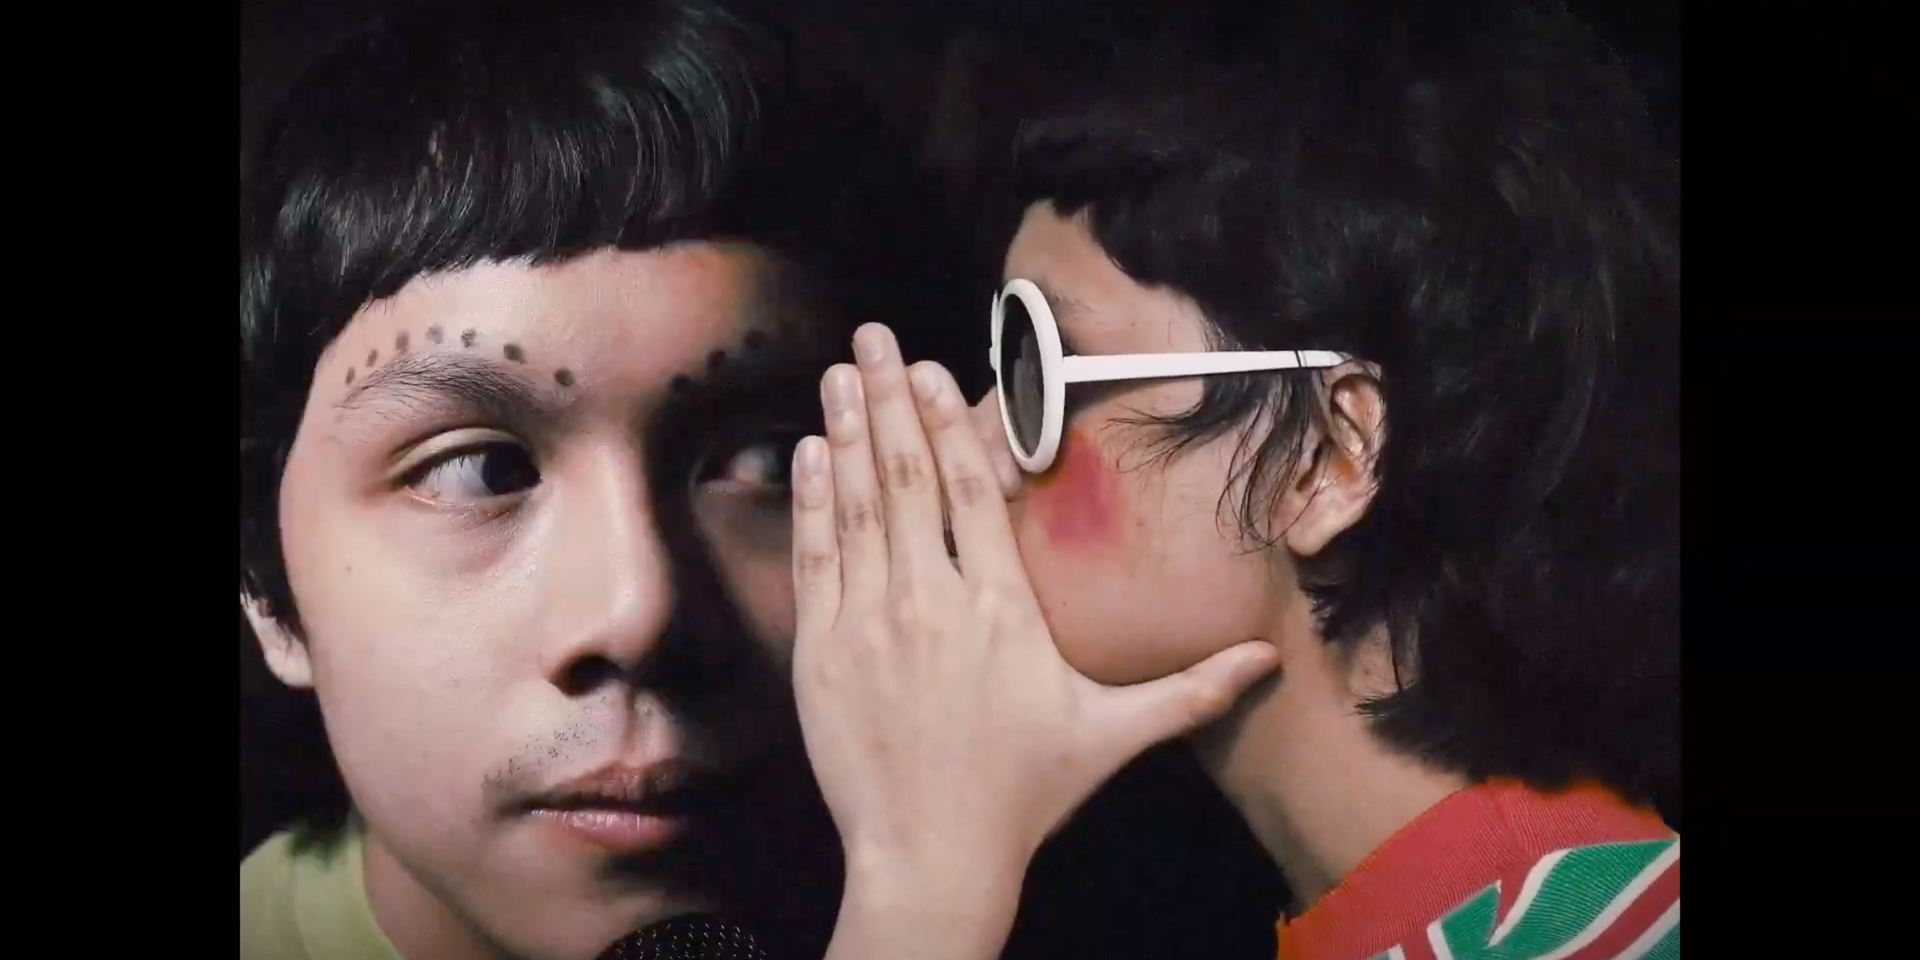 Zild Benitez releases new single 'Dila' for those who "can't keep their mouth shut" – watch